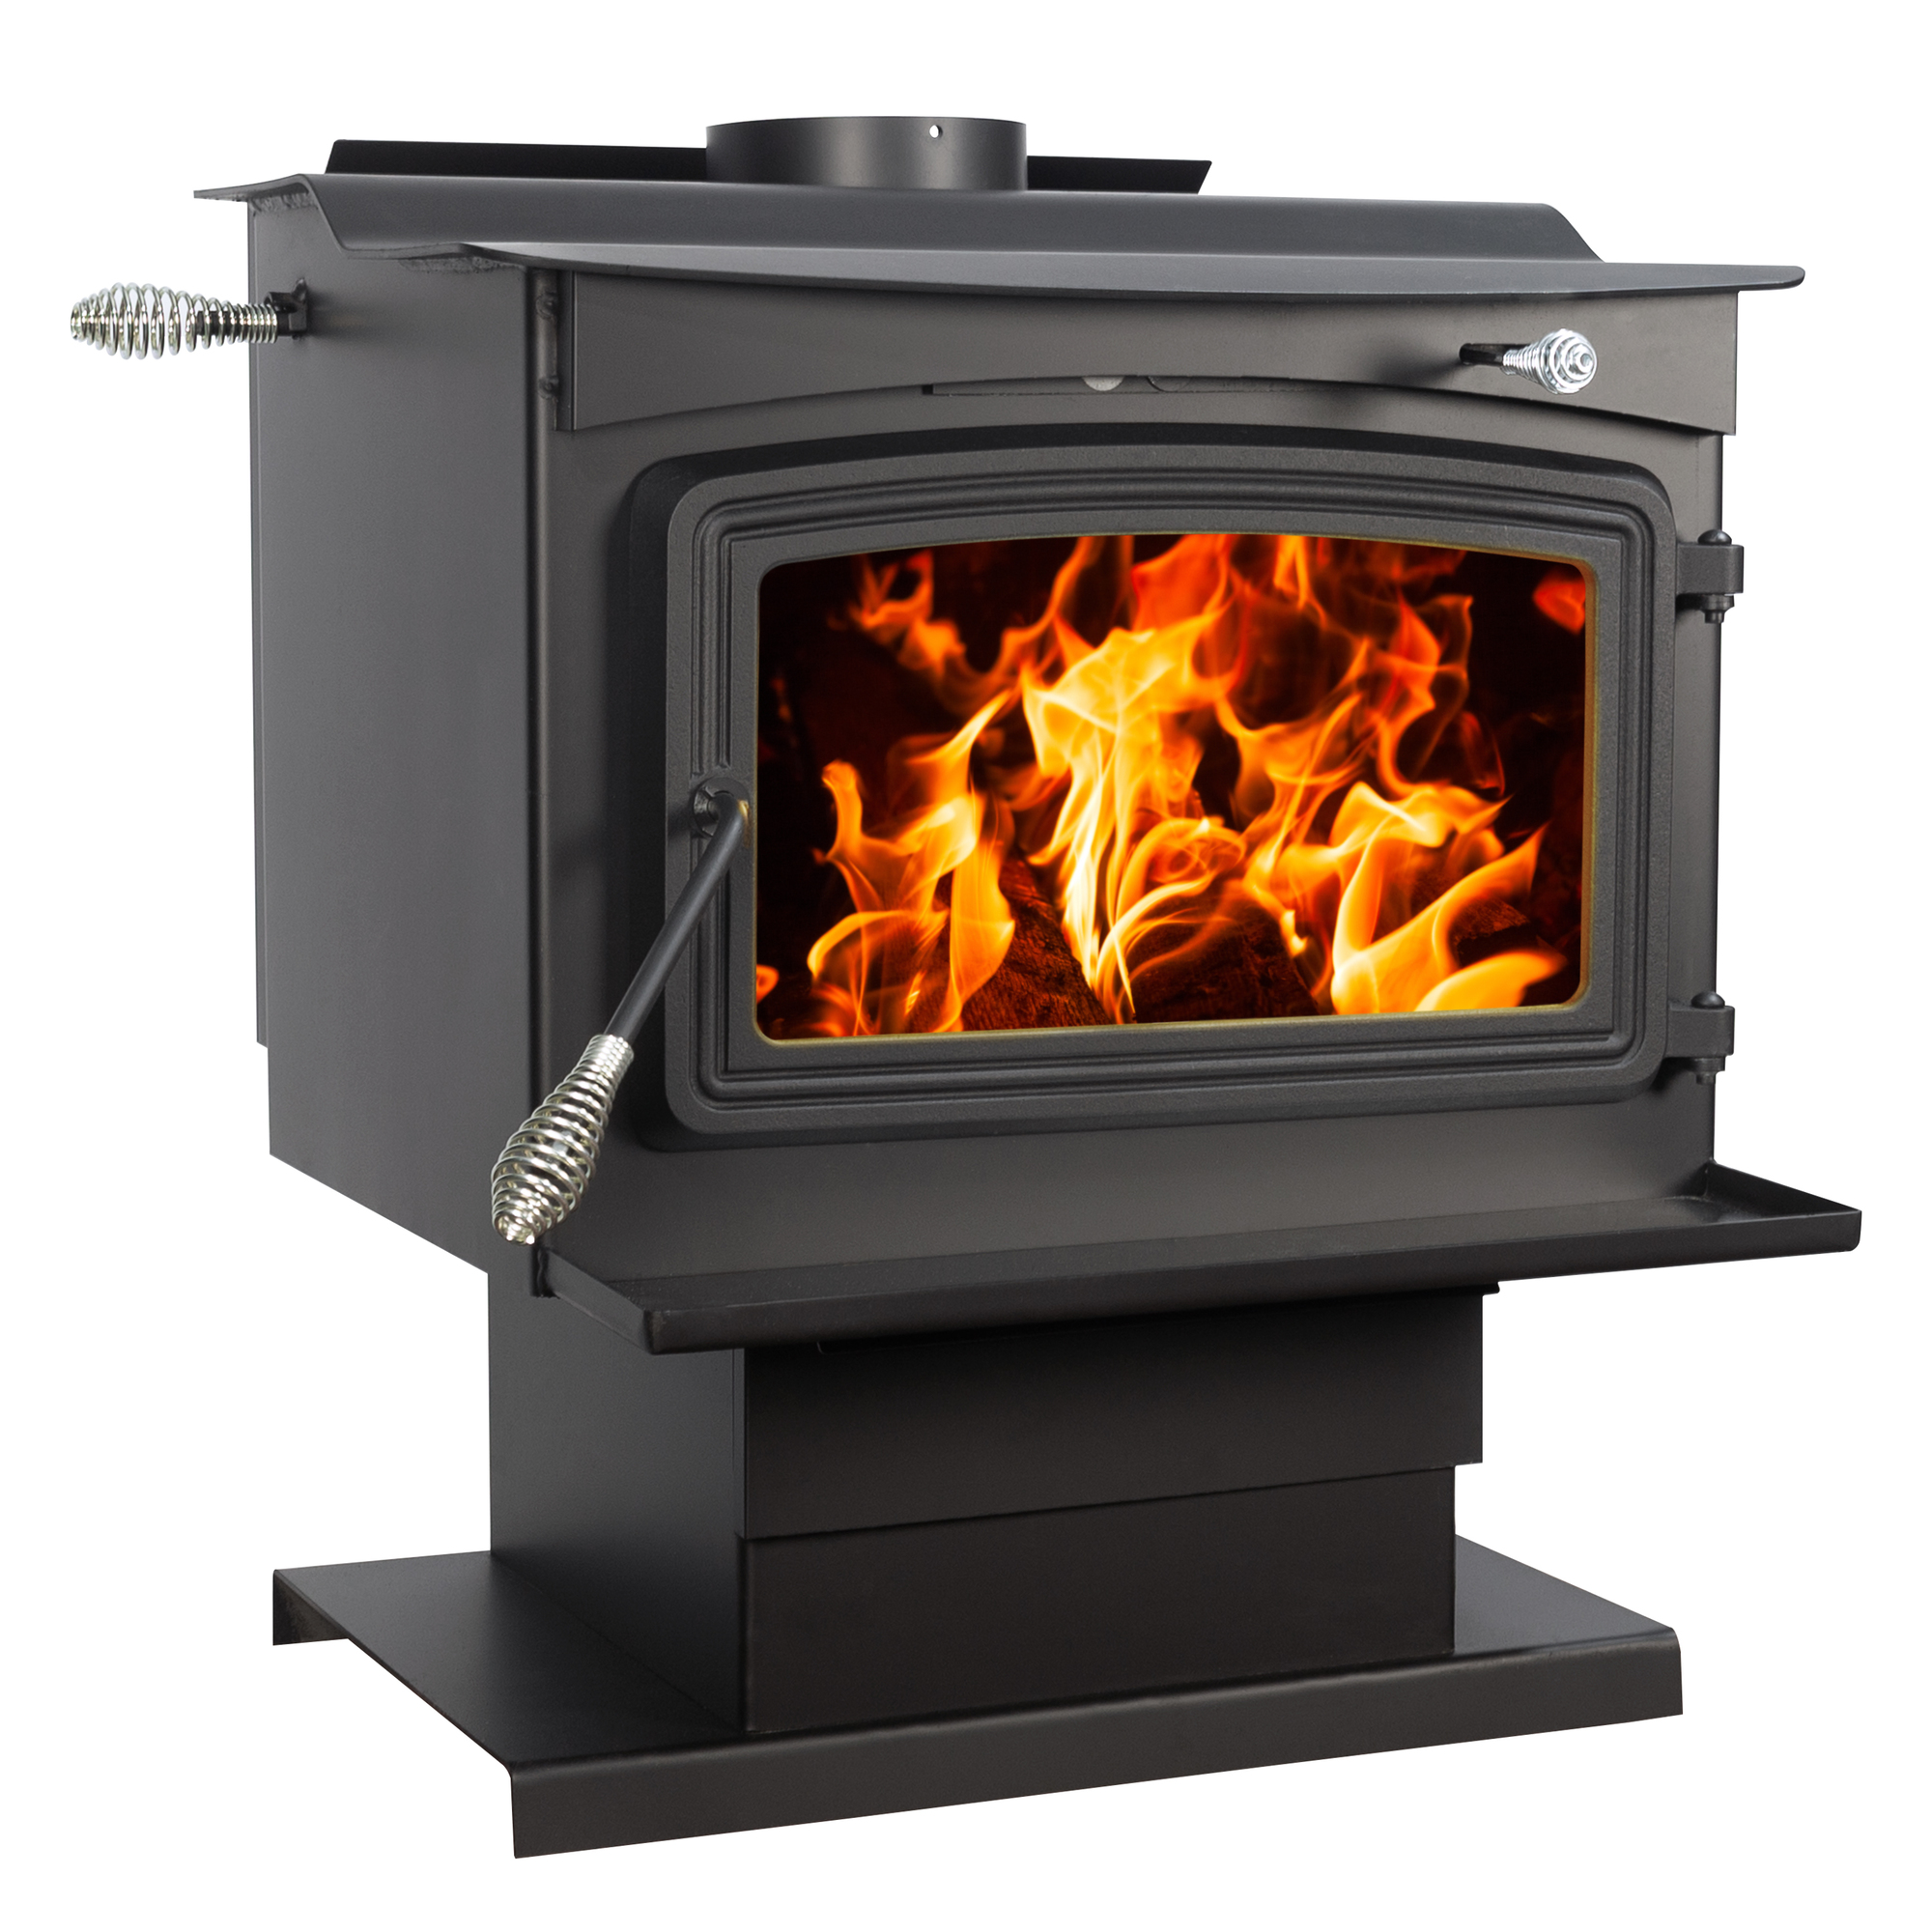 heating with a wood cook stove??